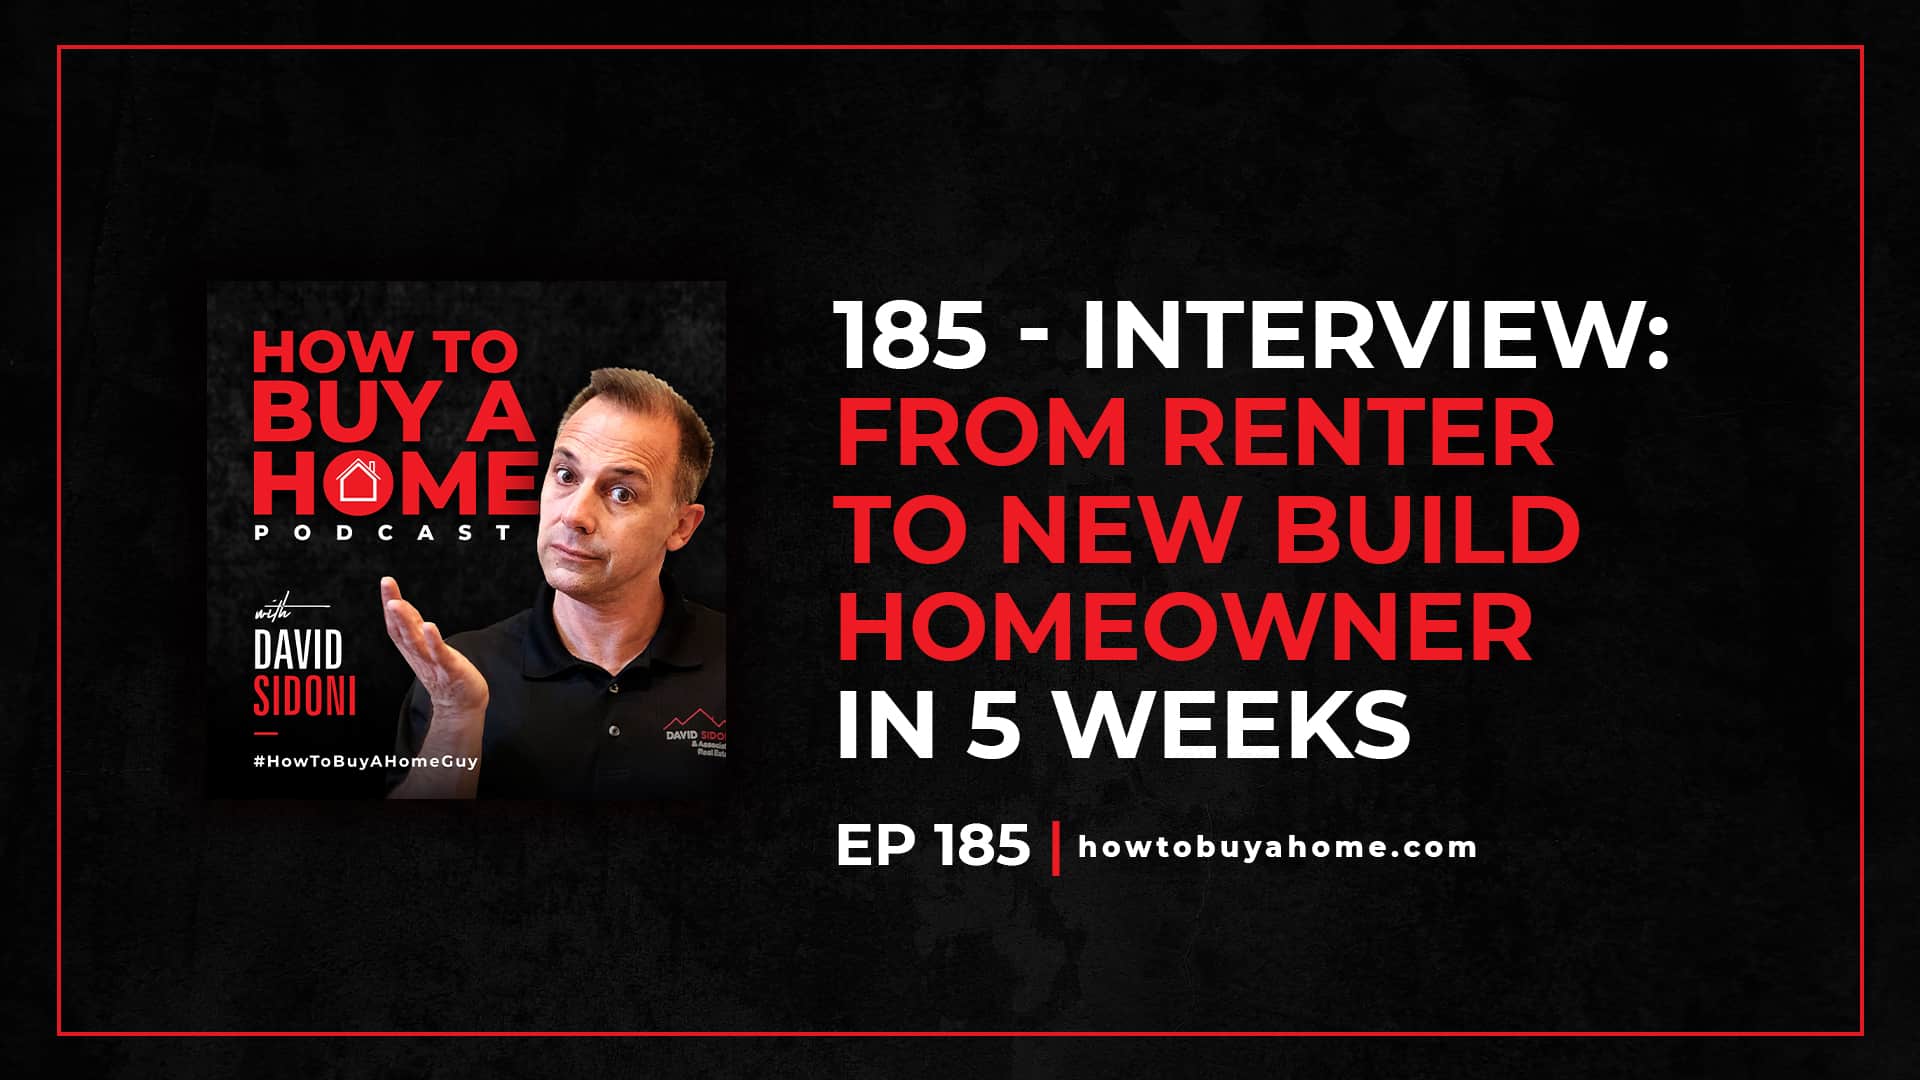 Ep. 185 – INTERVIEW From Renter to New Build Homeowner in 5 WEEKS